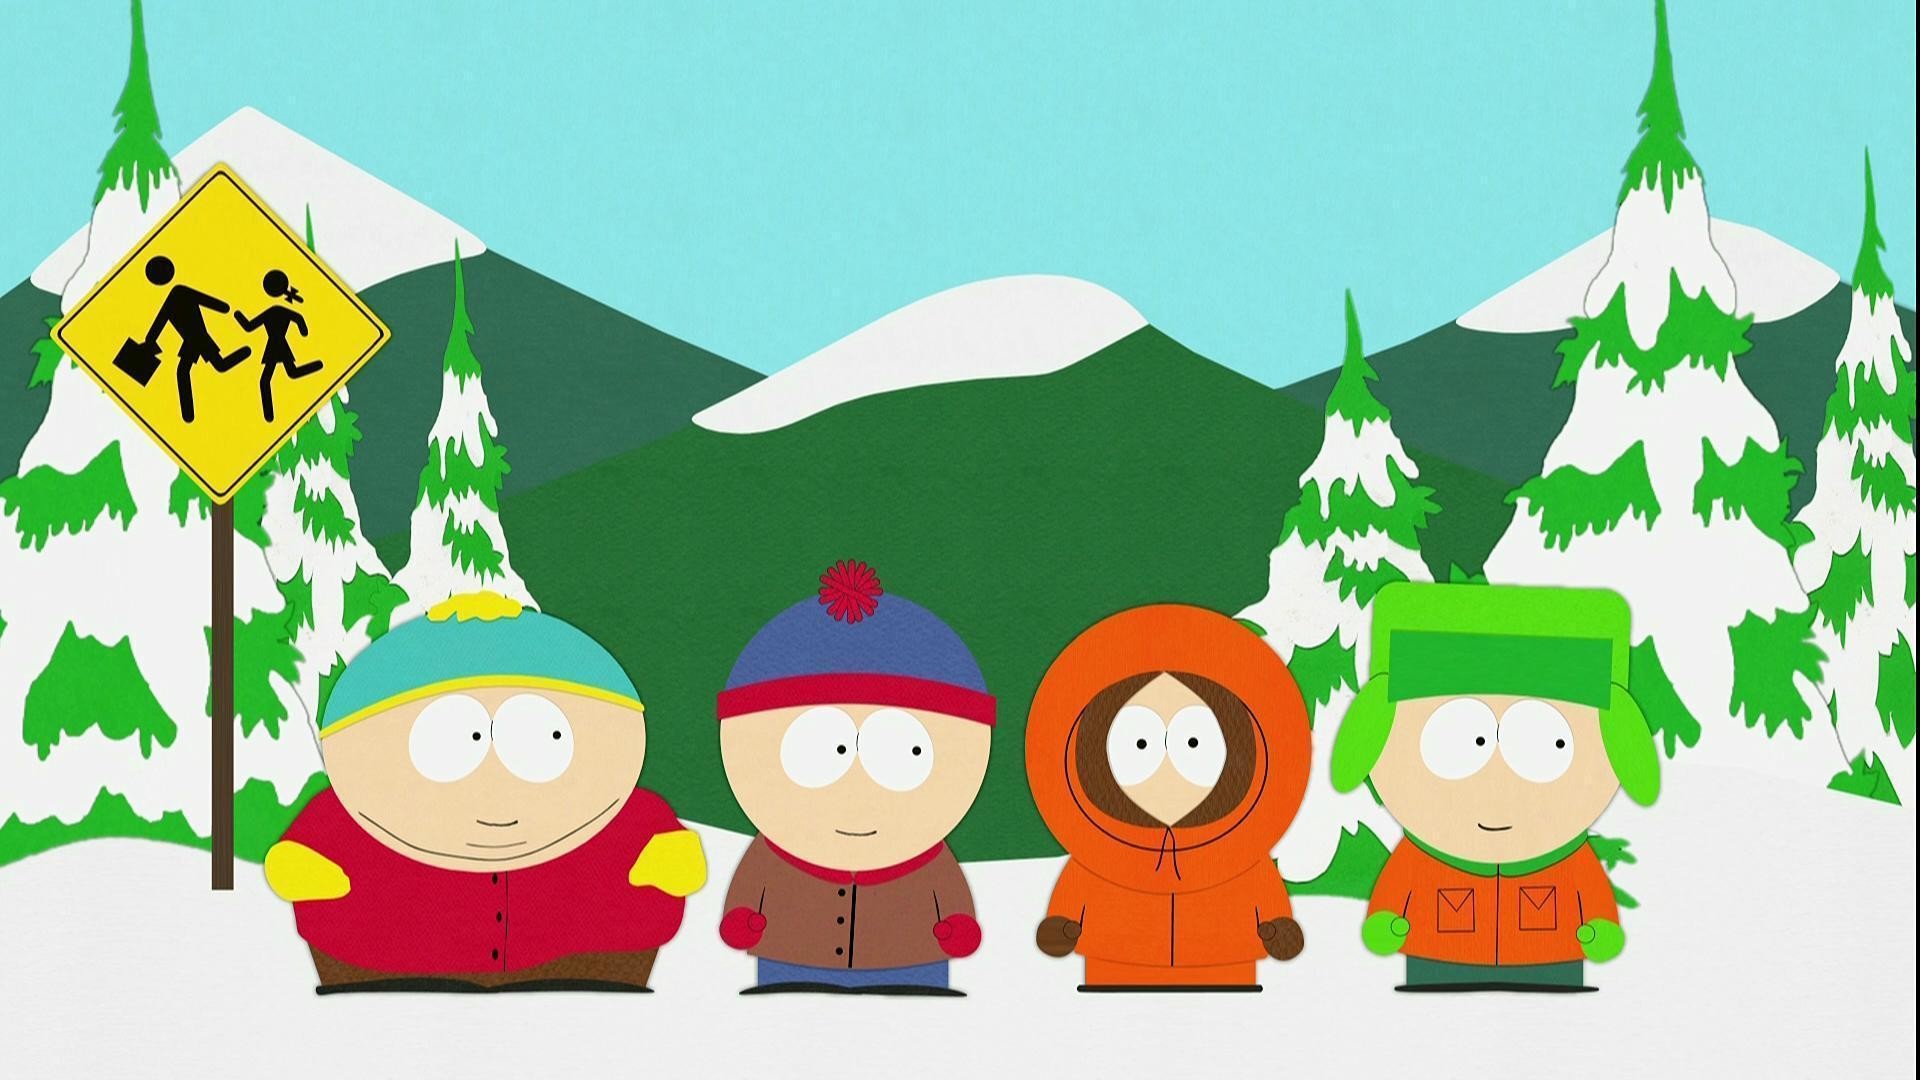 South Park wallpaper by MaxxSick  Download on ZEDGE  b578